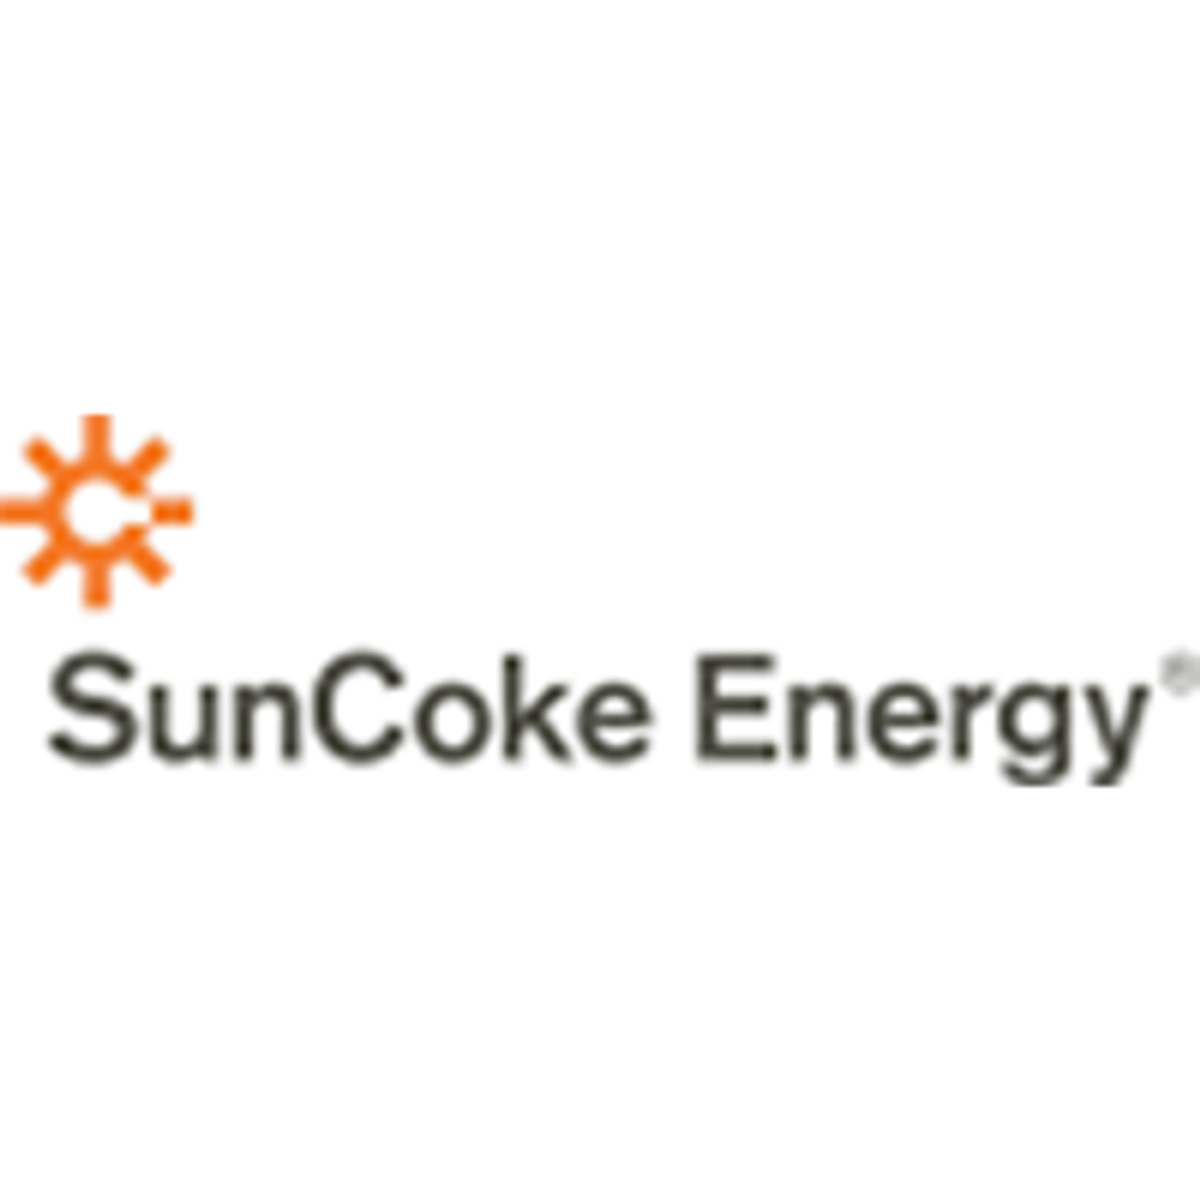 SUNCOKE ENERGY, INC. REPORTS STRONG SECOND QUARTER 2022 RESULTS